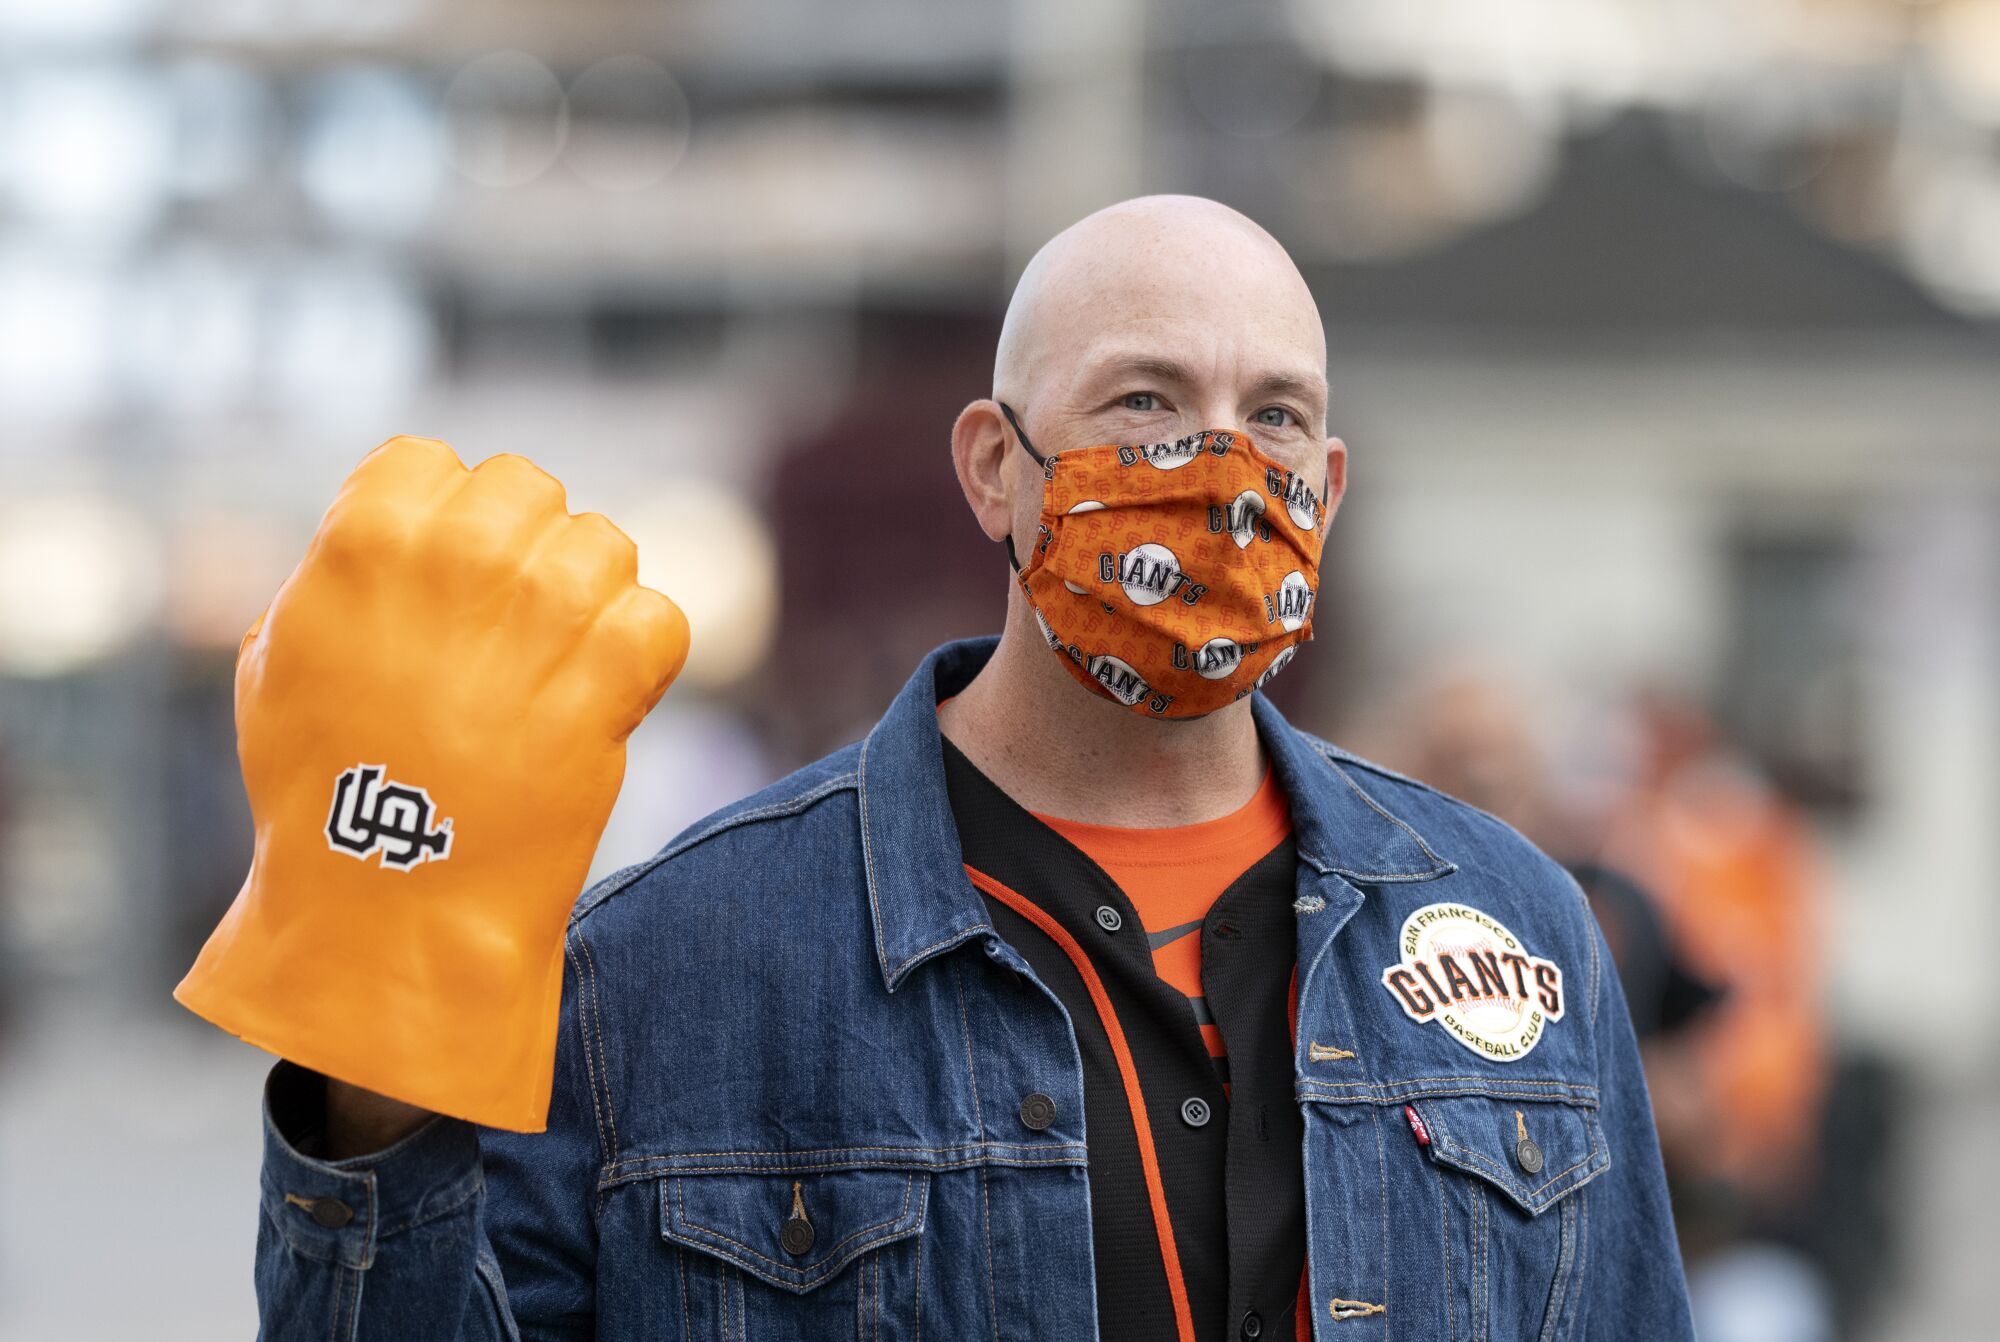 Giants fan Dave Lowe holds up a large replica of a fist on his hand with the Giants logo on it